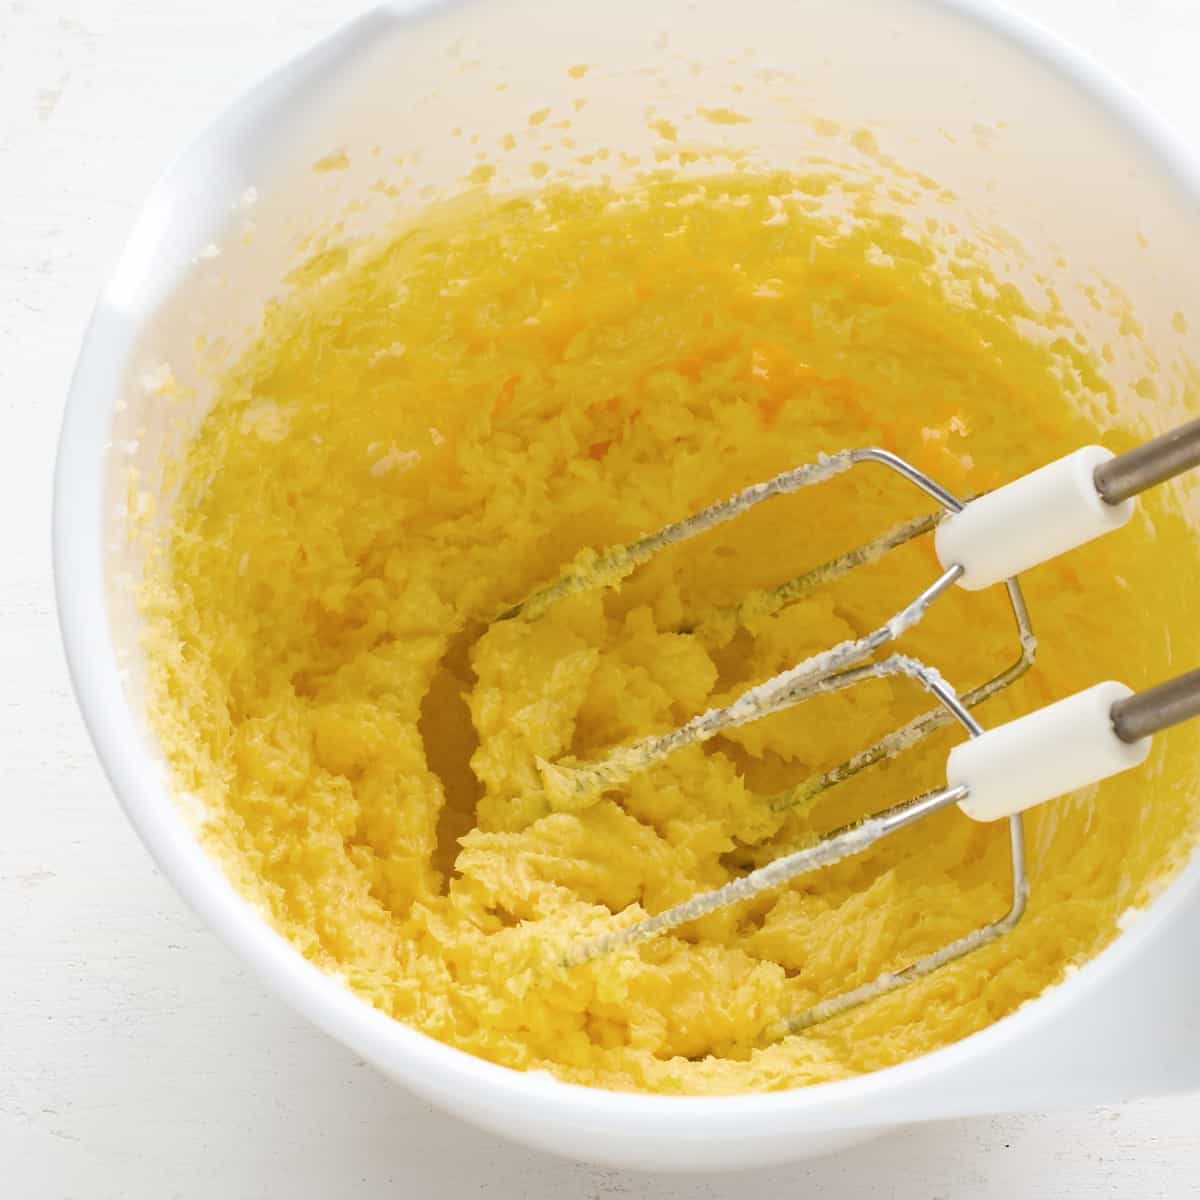 Creamed butter with sugar and egg yolks.